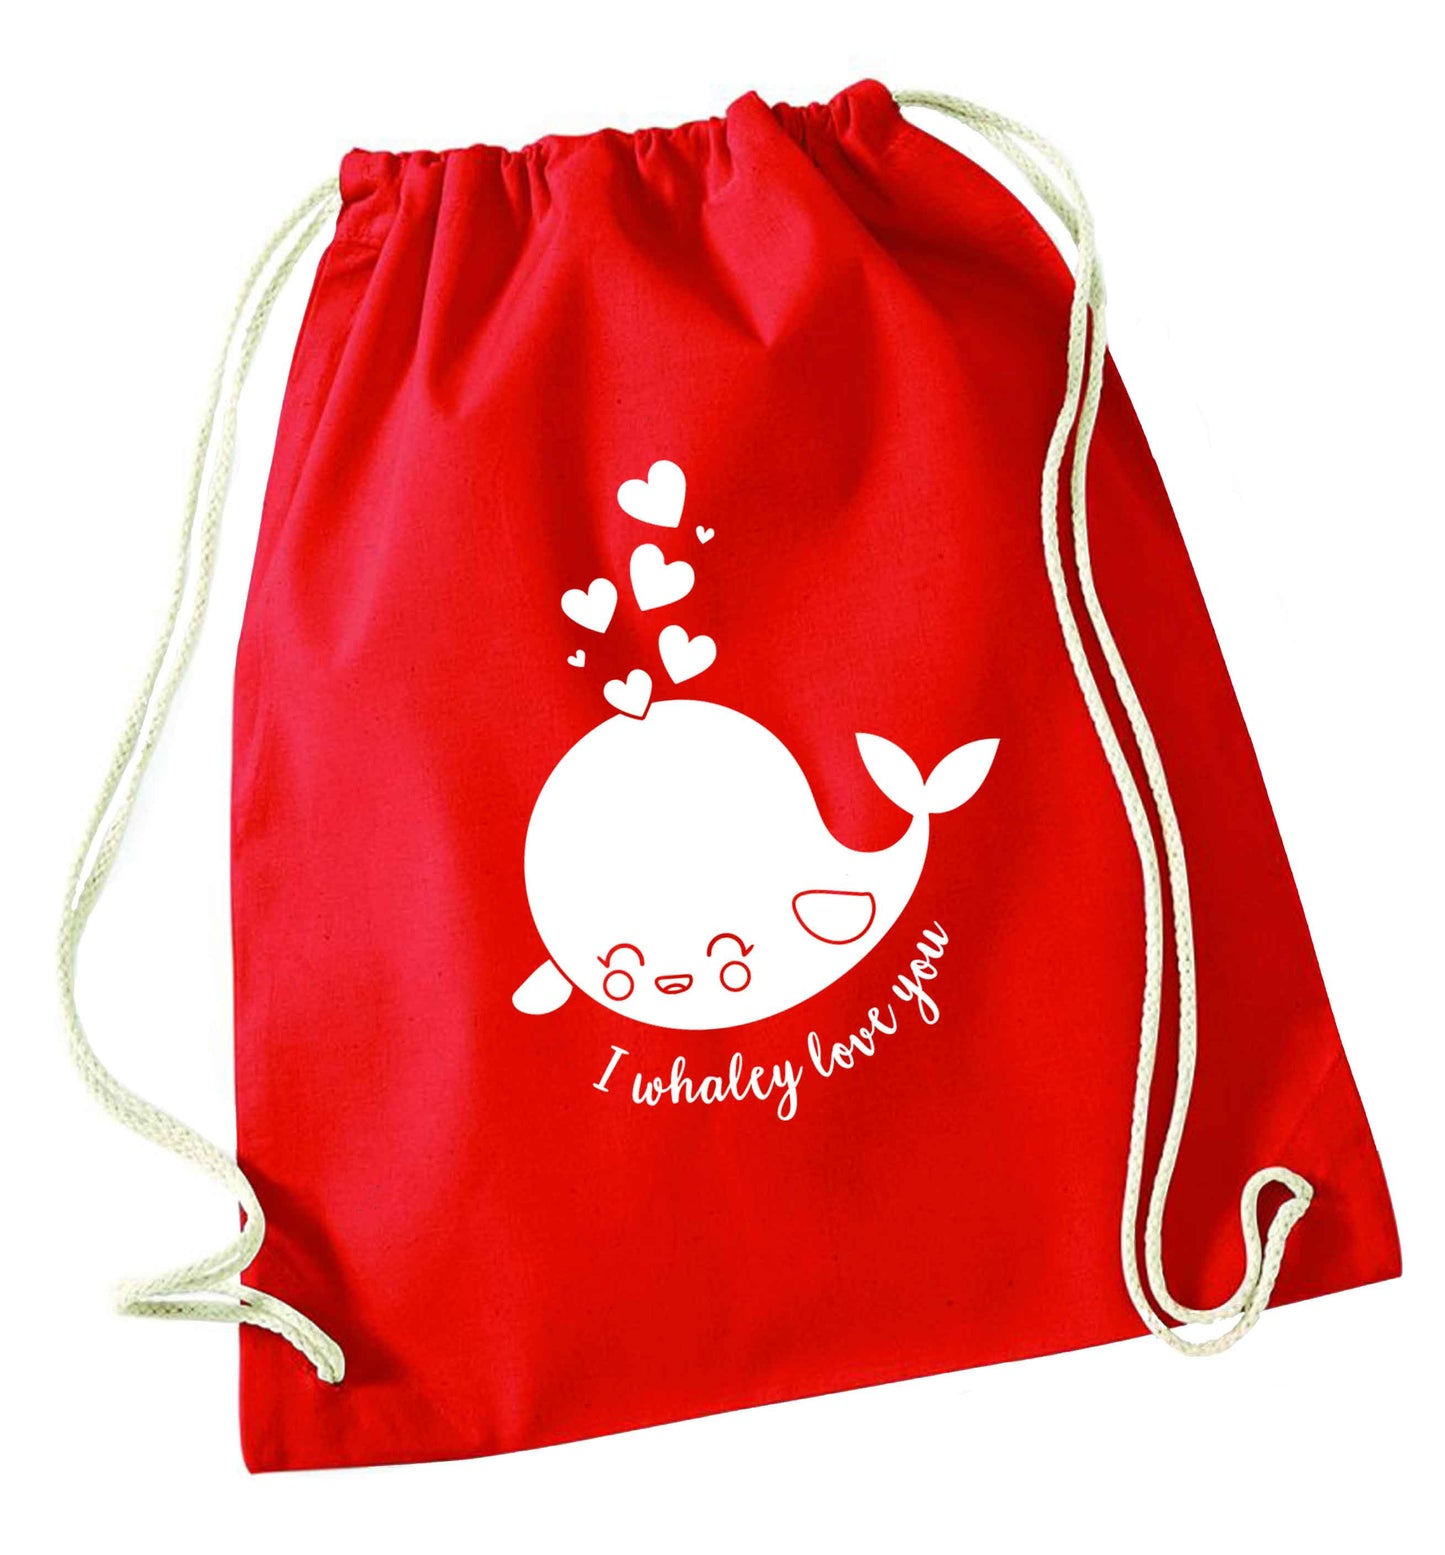 I whaley love you red drawstring bag 